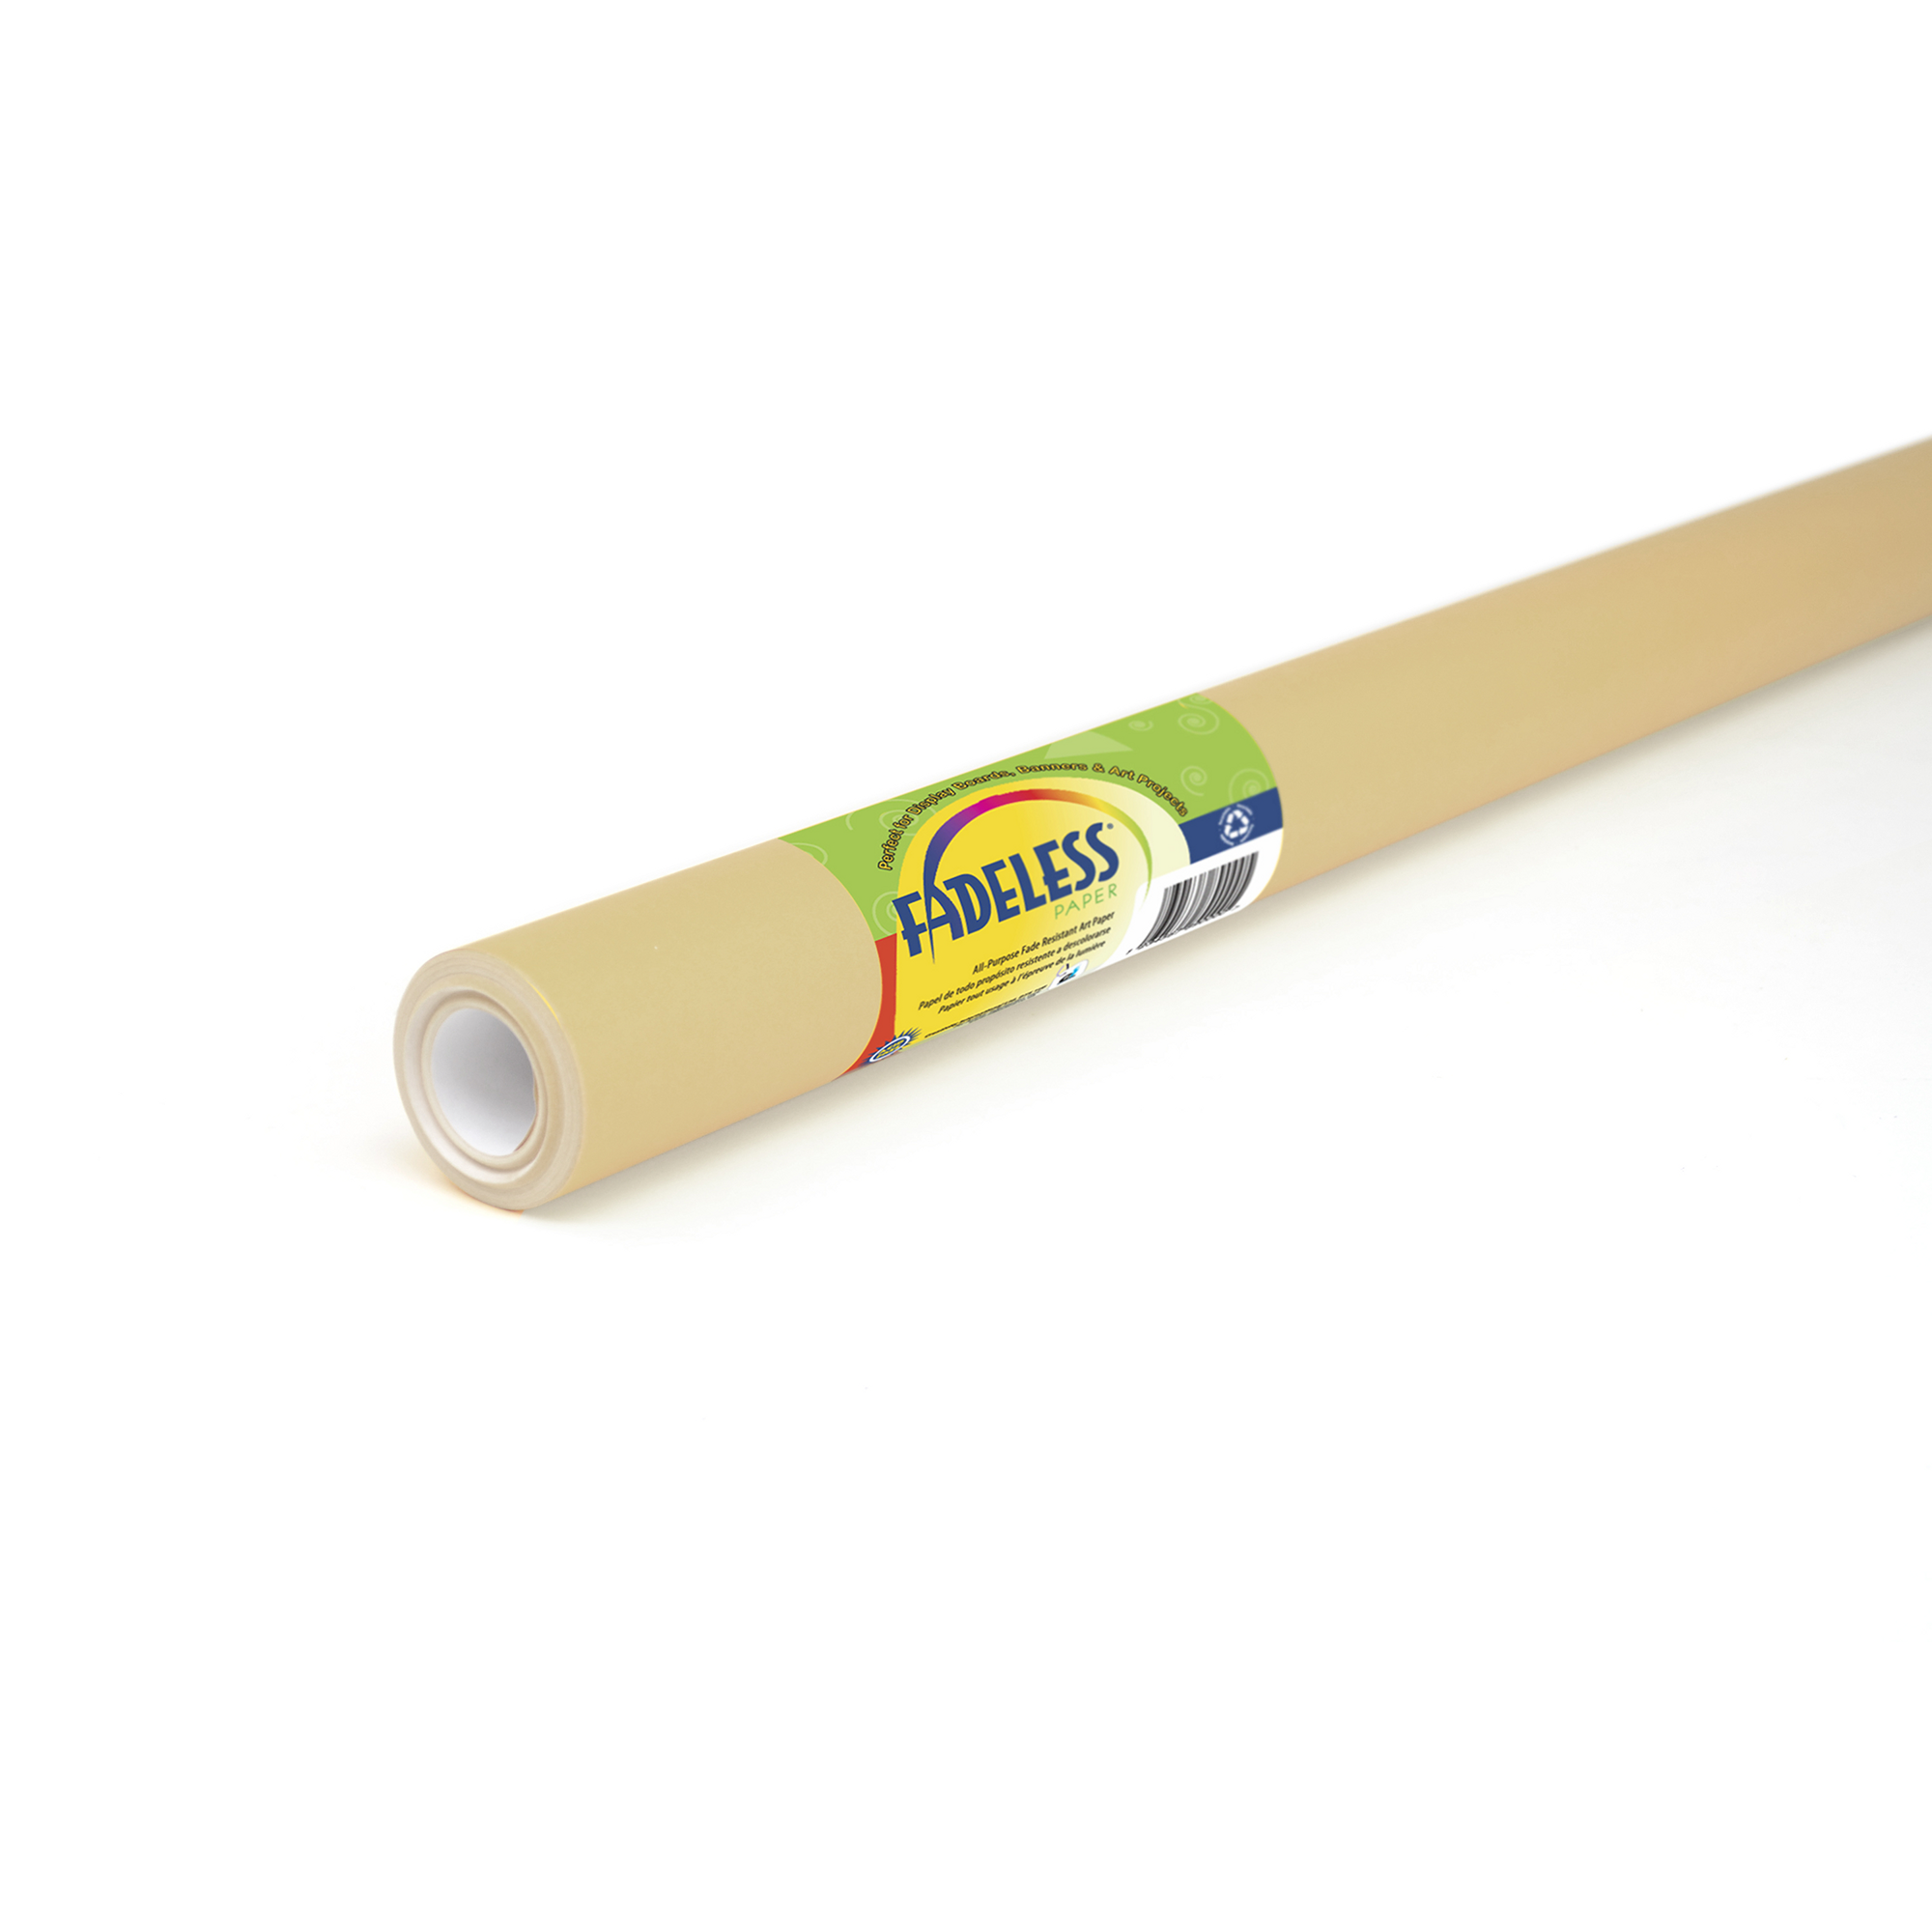 HE1344088 - Fadeless Extra Wide Display Paper Roll - Tan - 1218mm x 15m ...